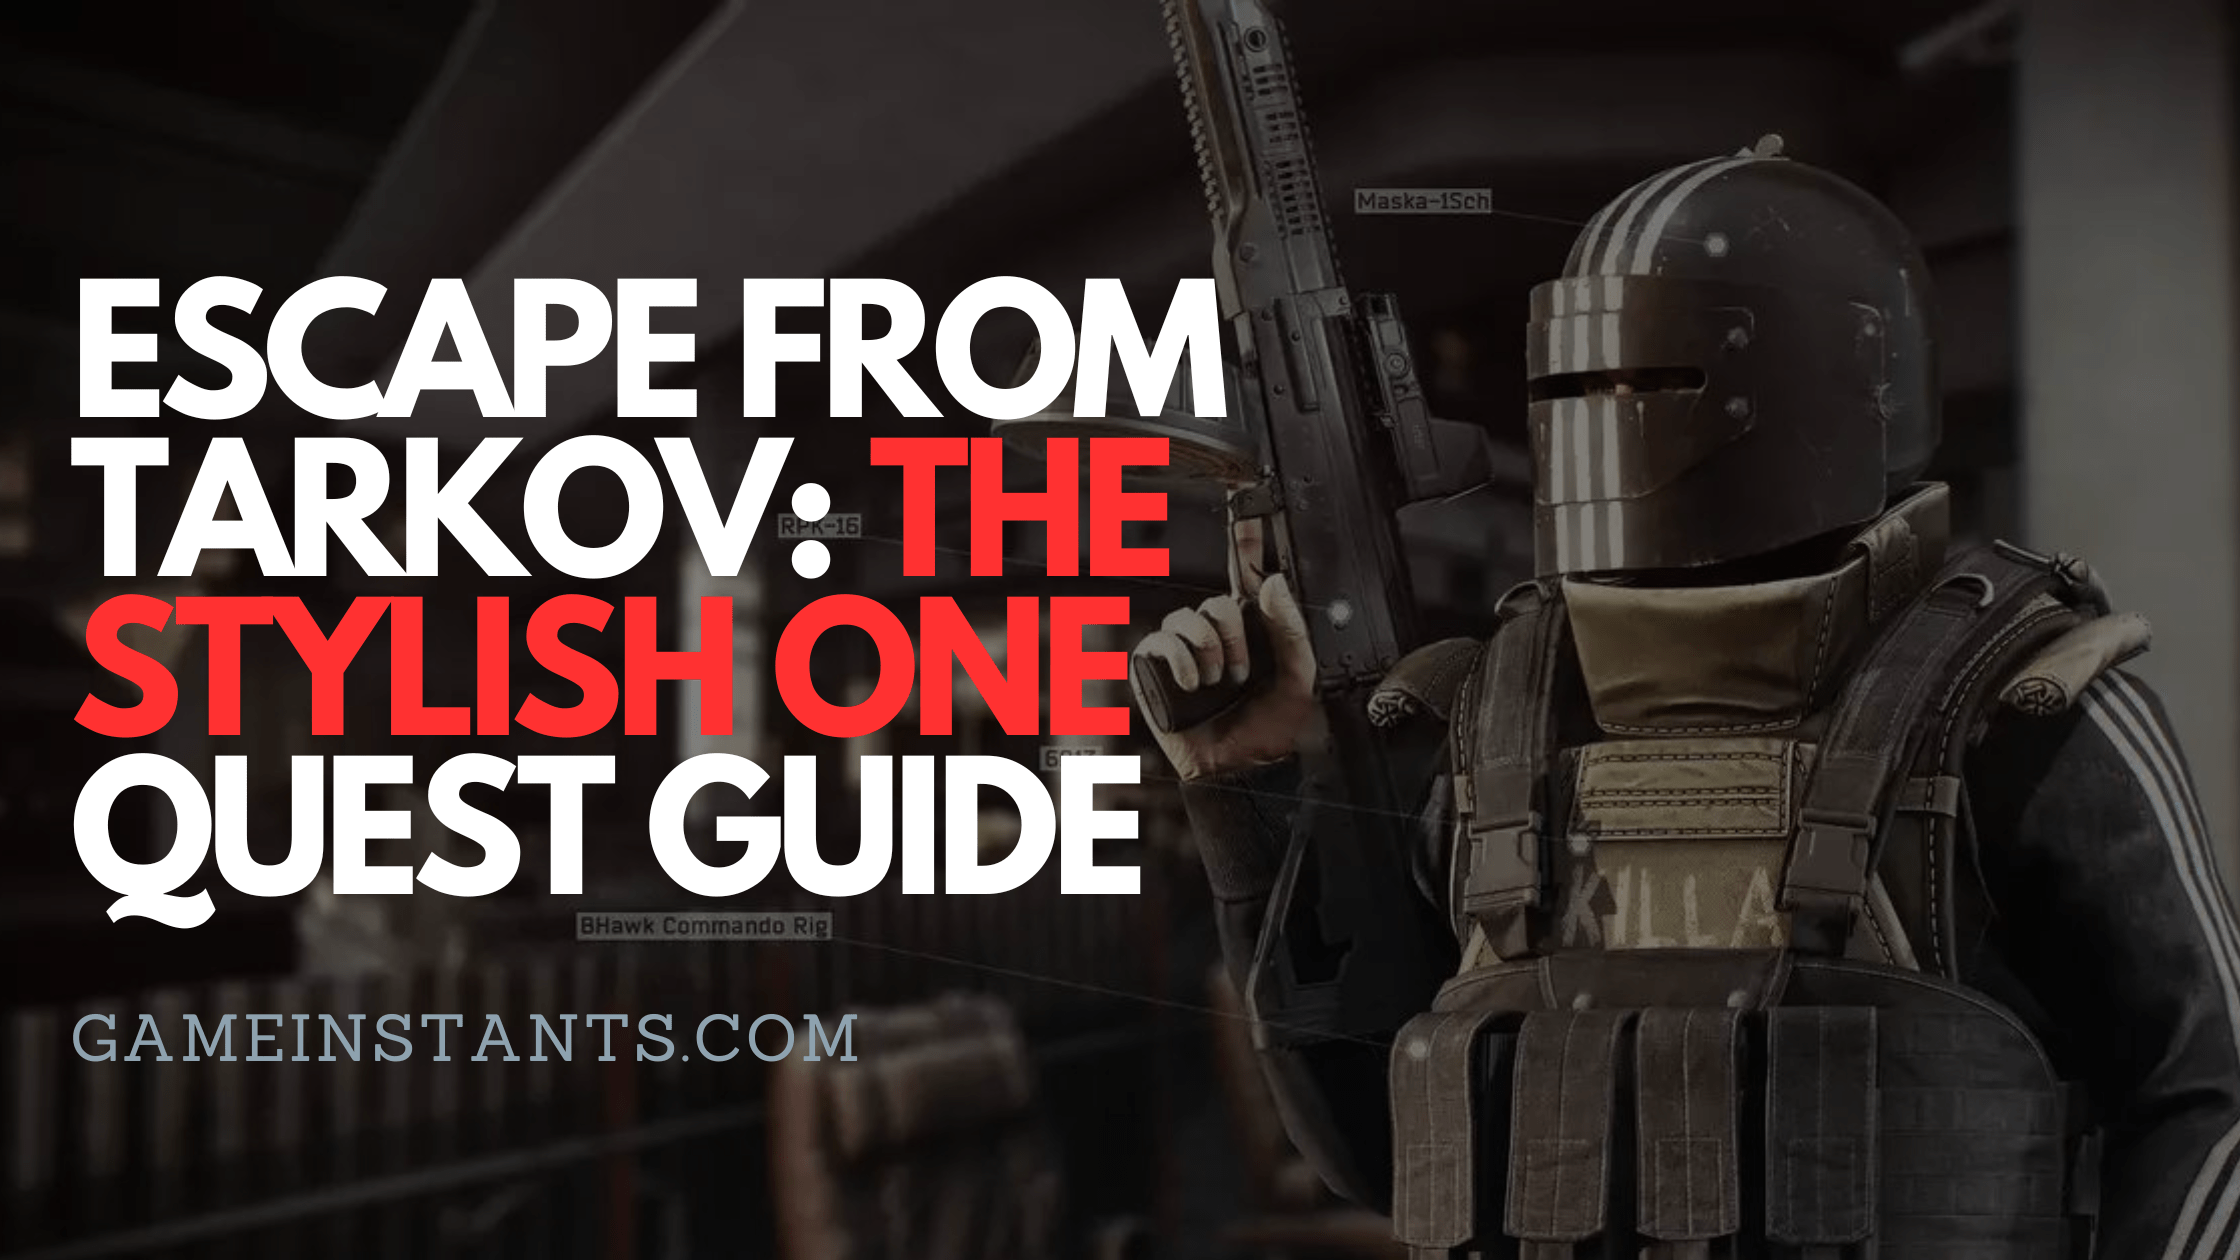 Escape from Tarkov: The Stylish one Quest Guide